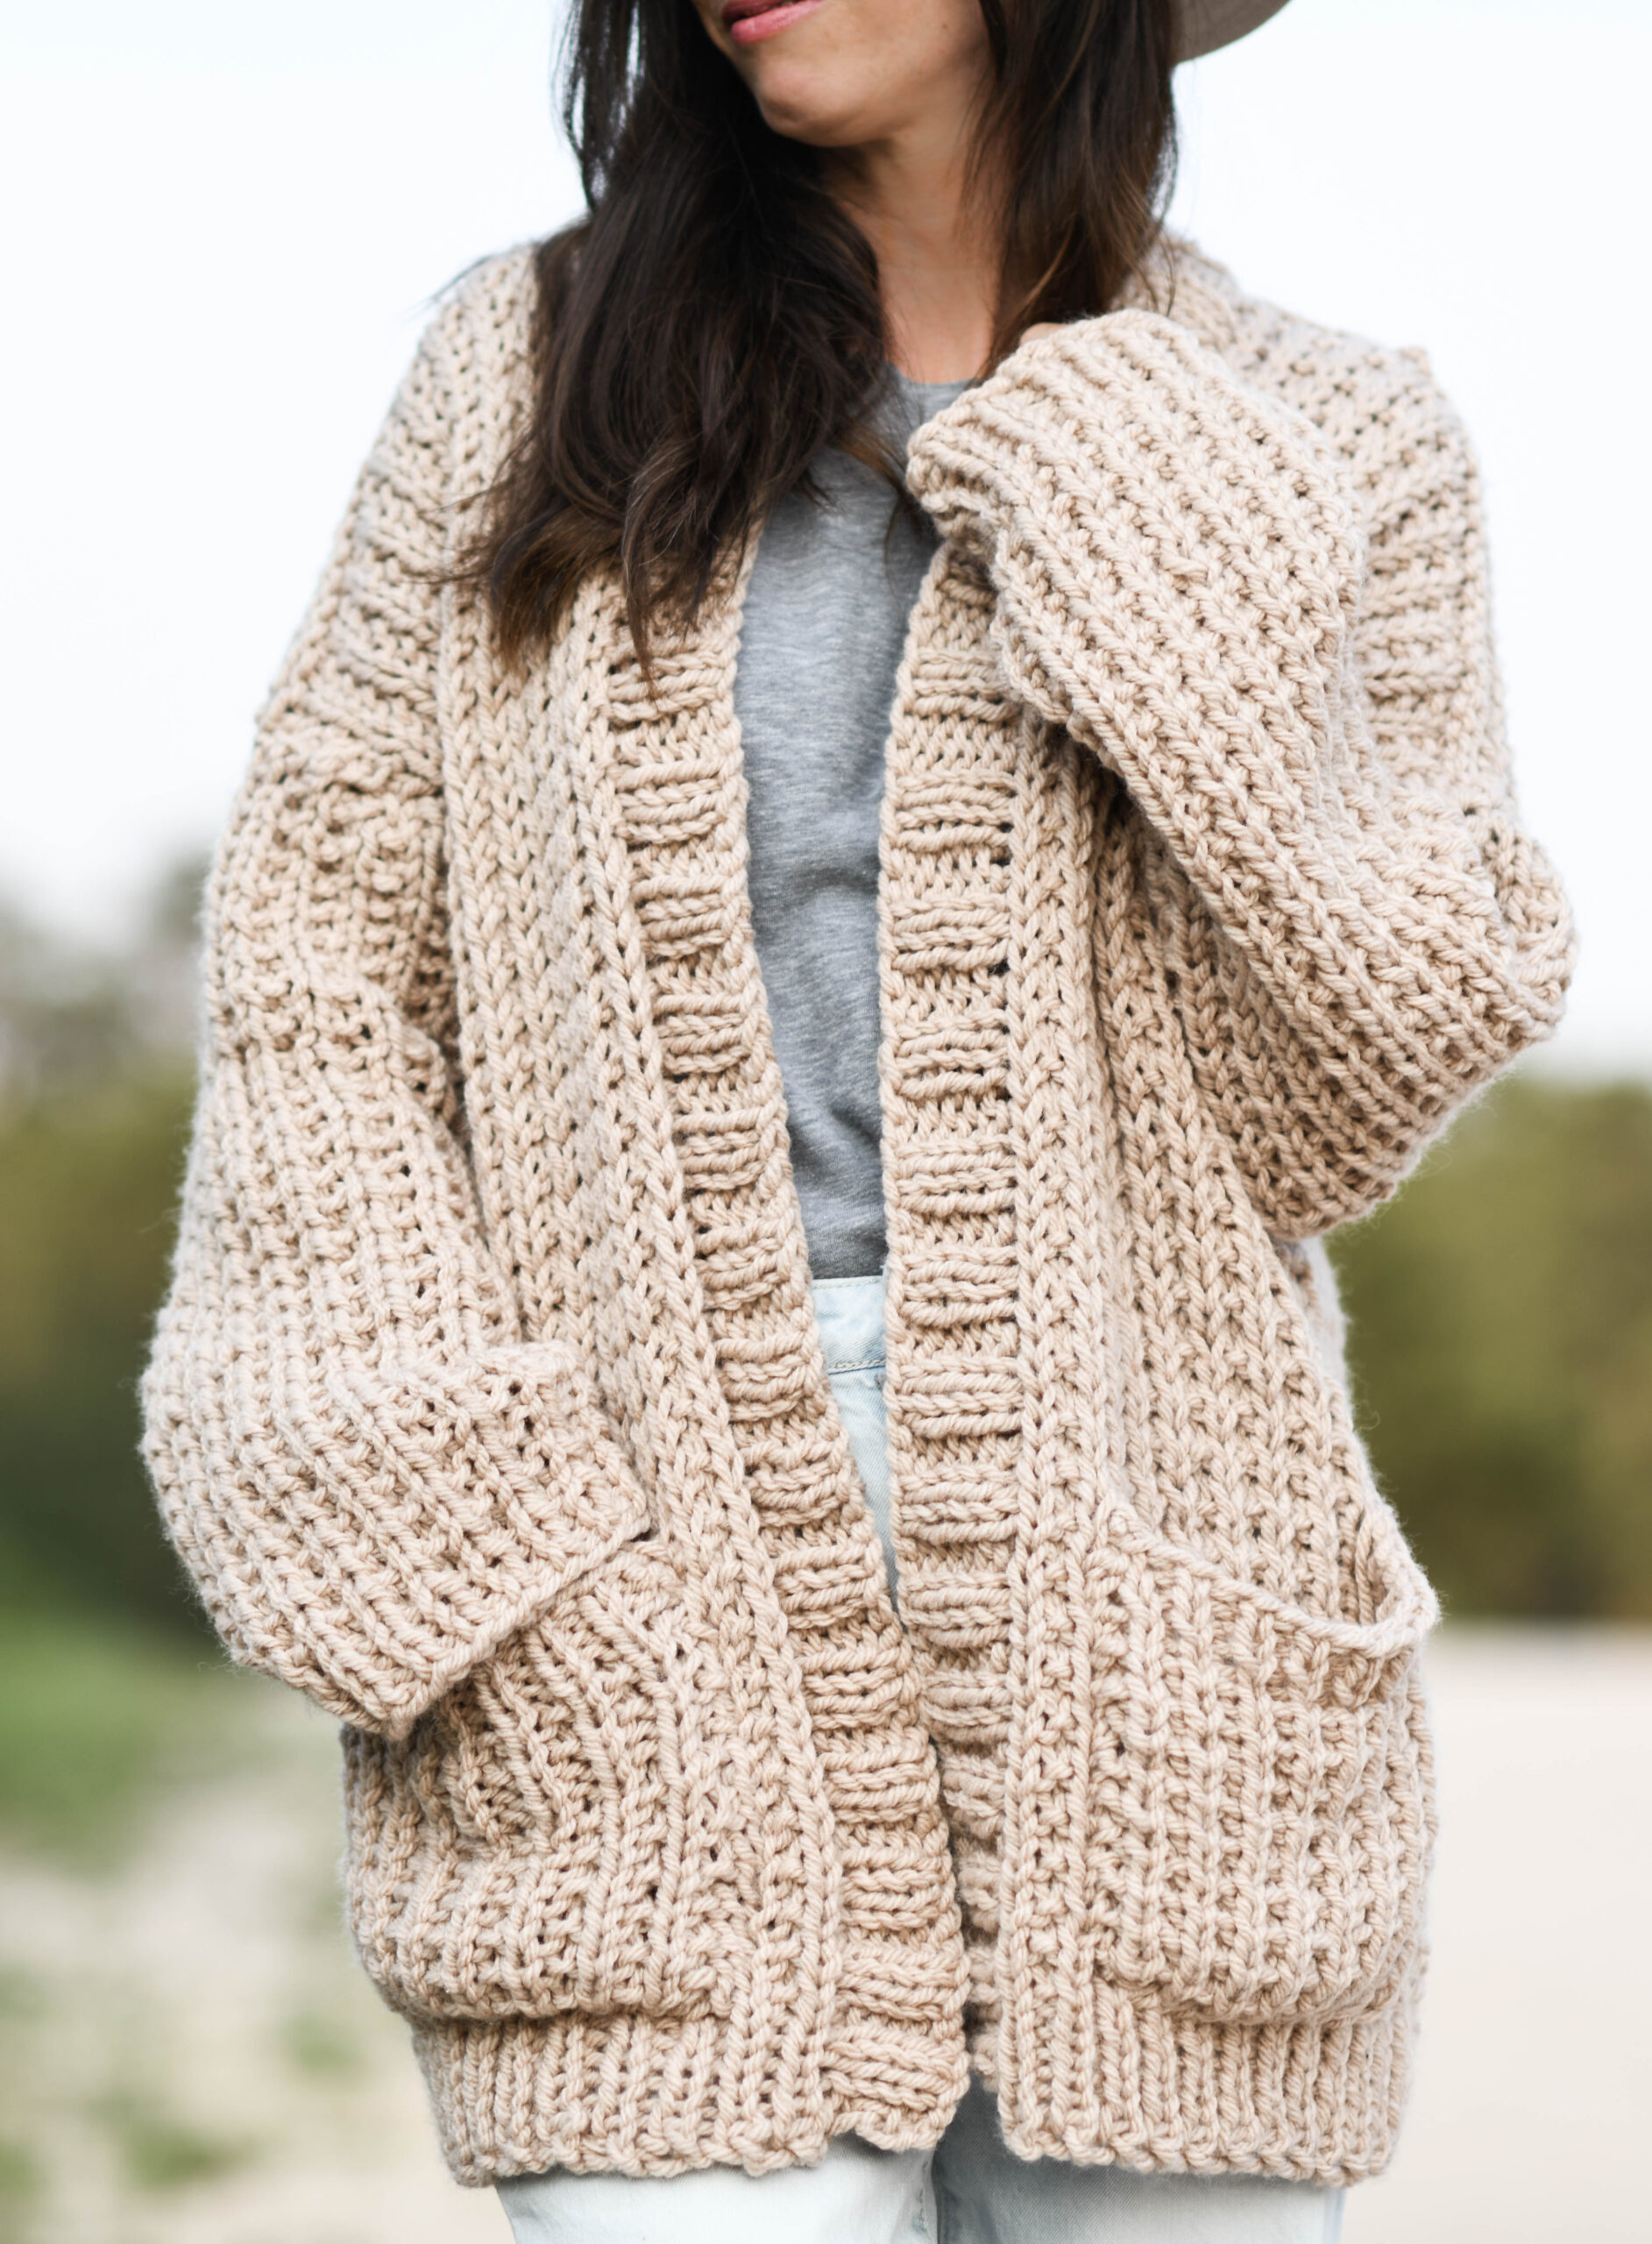 Ladies Women's Stunning All-round Cable Jacket Knitting Pattern